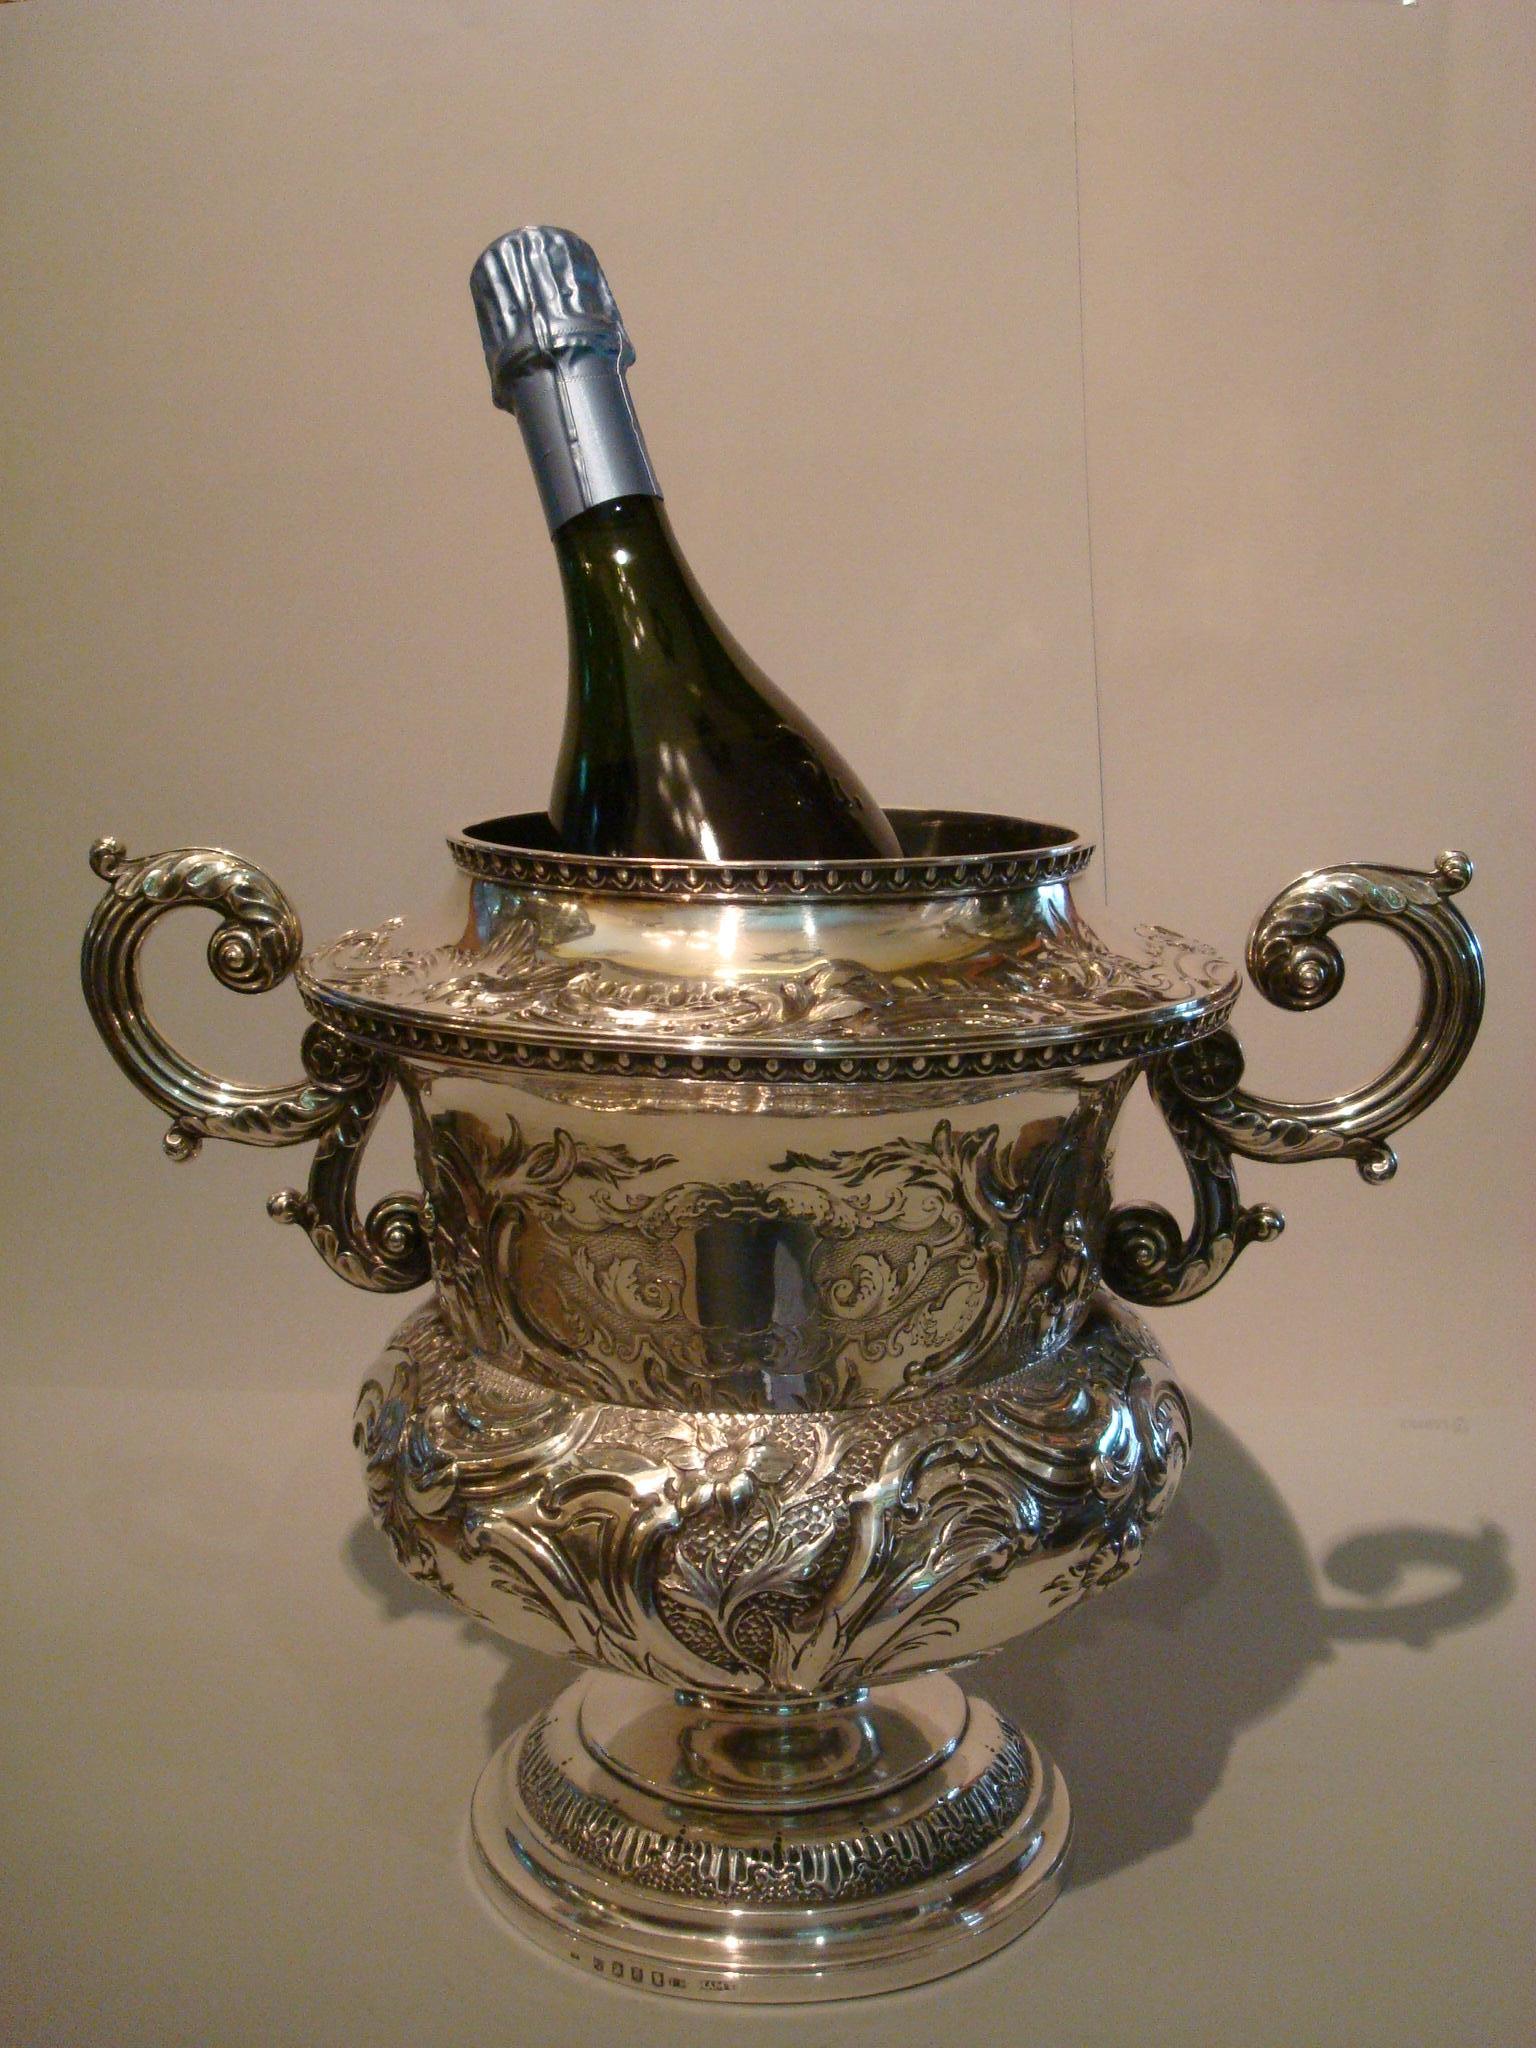 Fine chinoiserie wine or champagne cooler, sterling silver, Dublin 1812, George III, James Scott maker, HAMY retailer. It has engraved Chinese scenes all-over. Fully marked. Campagna-urn form, with leaf handles, chinoiserie design.